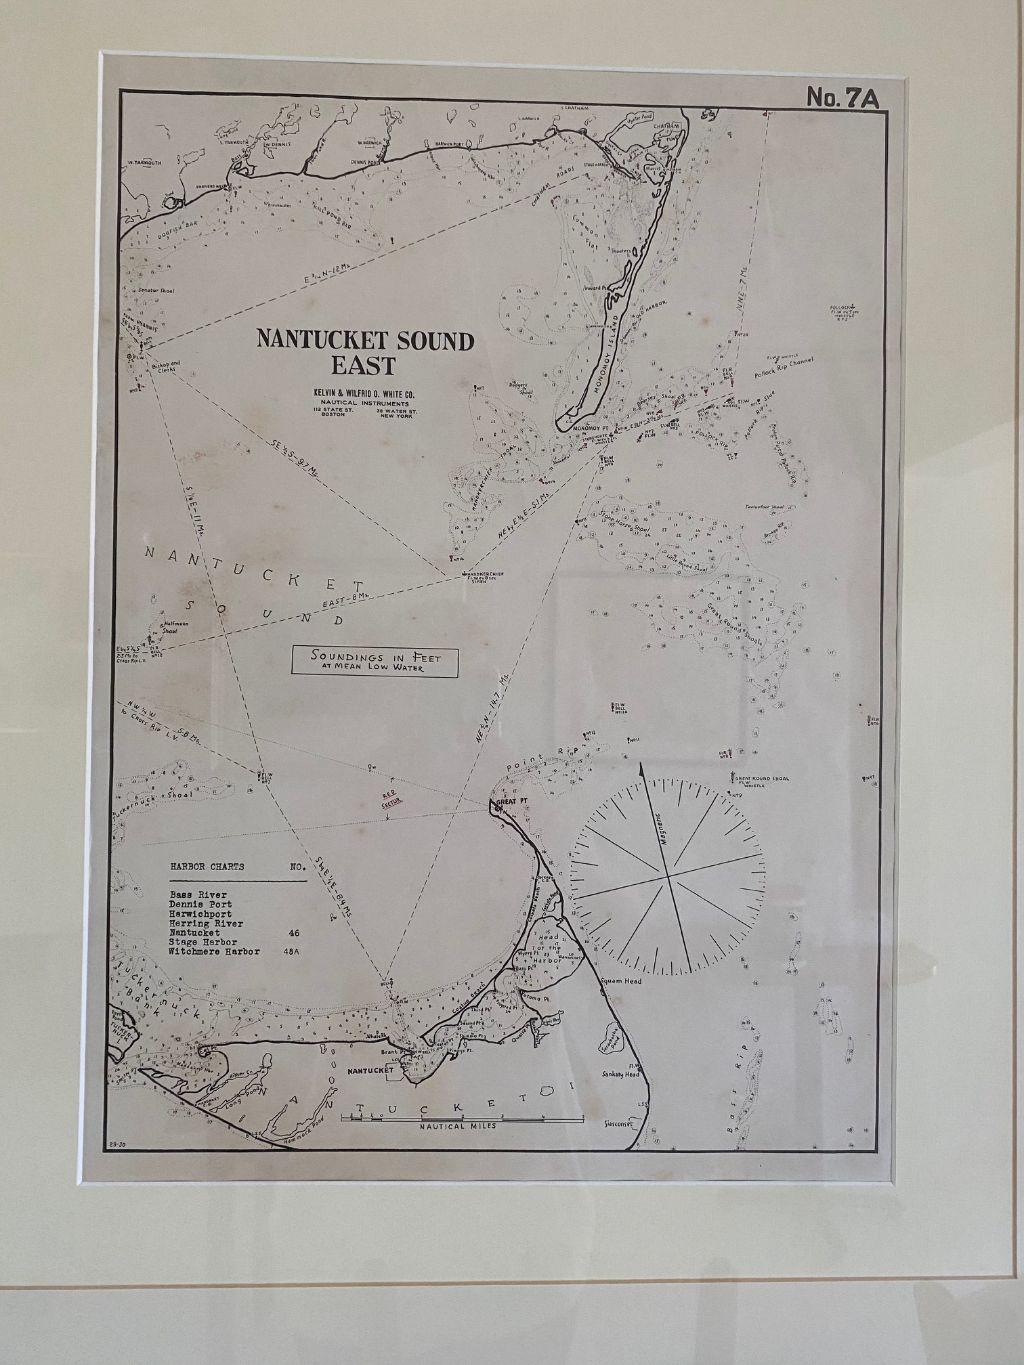 Eldridge chart of Nantucket Sound – East, circa 1920, a scarce navigational chart showing the Eastern approach into Nantucket Sound. This chart was made expressly for Eldridge's son-in-law Wilfrid White of the famous Kelvin & White Ship Chandlers in